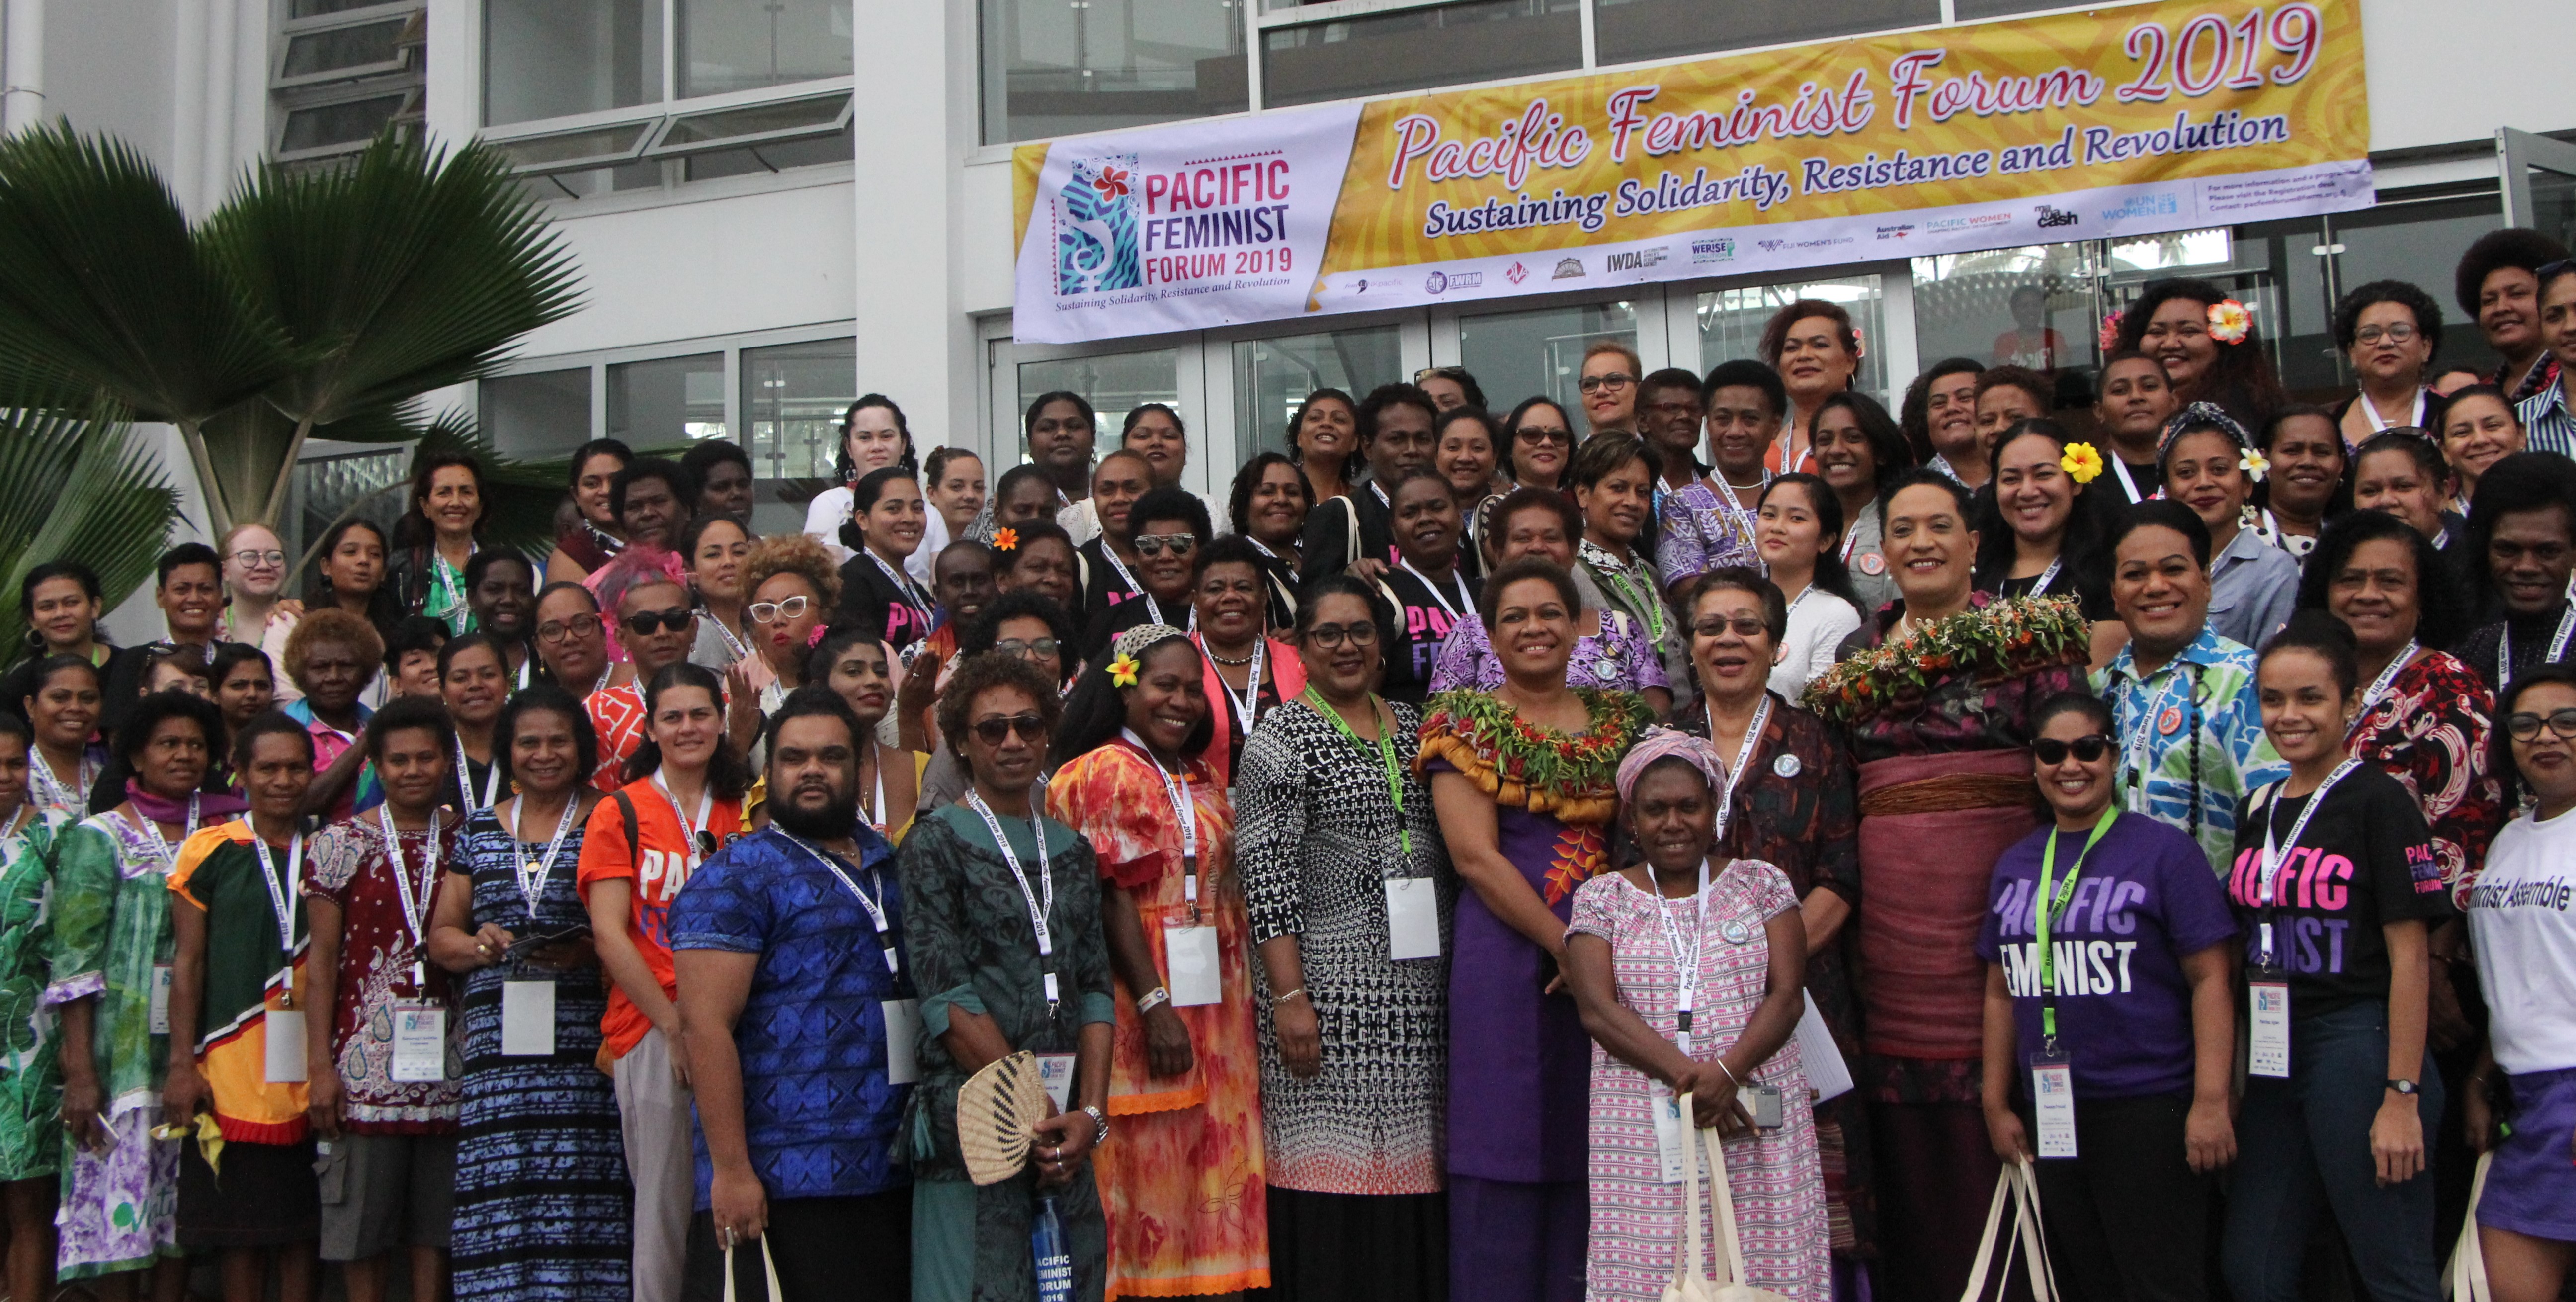 Delegates to the second Pacific Feminist Forum